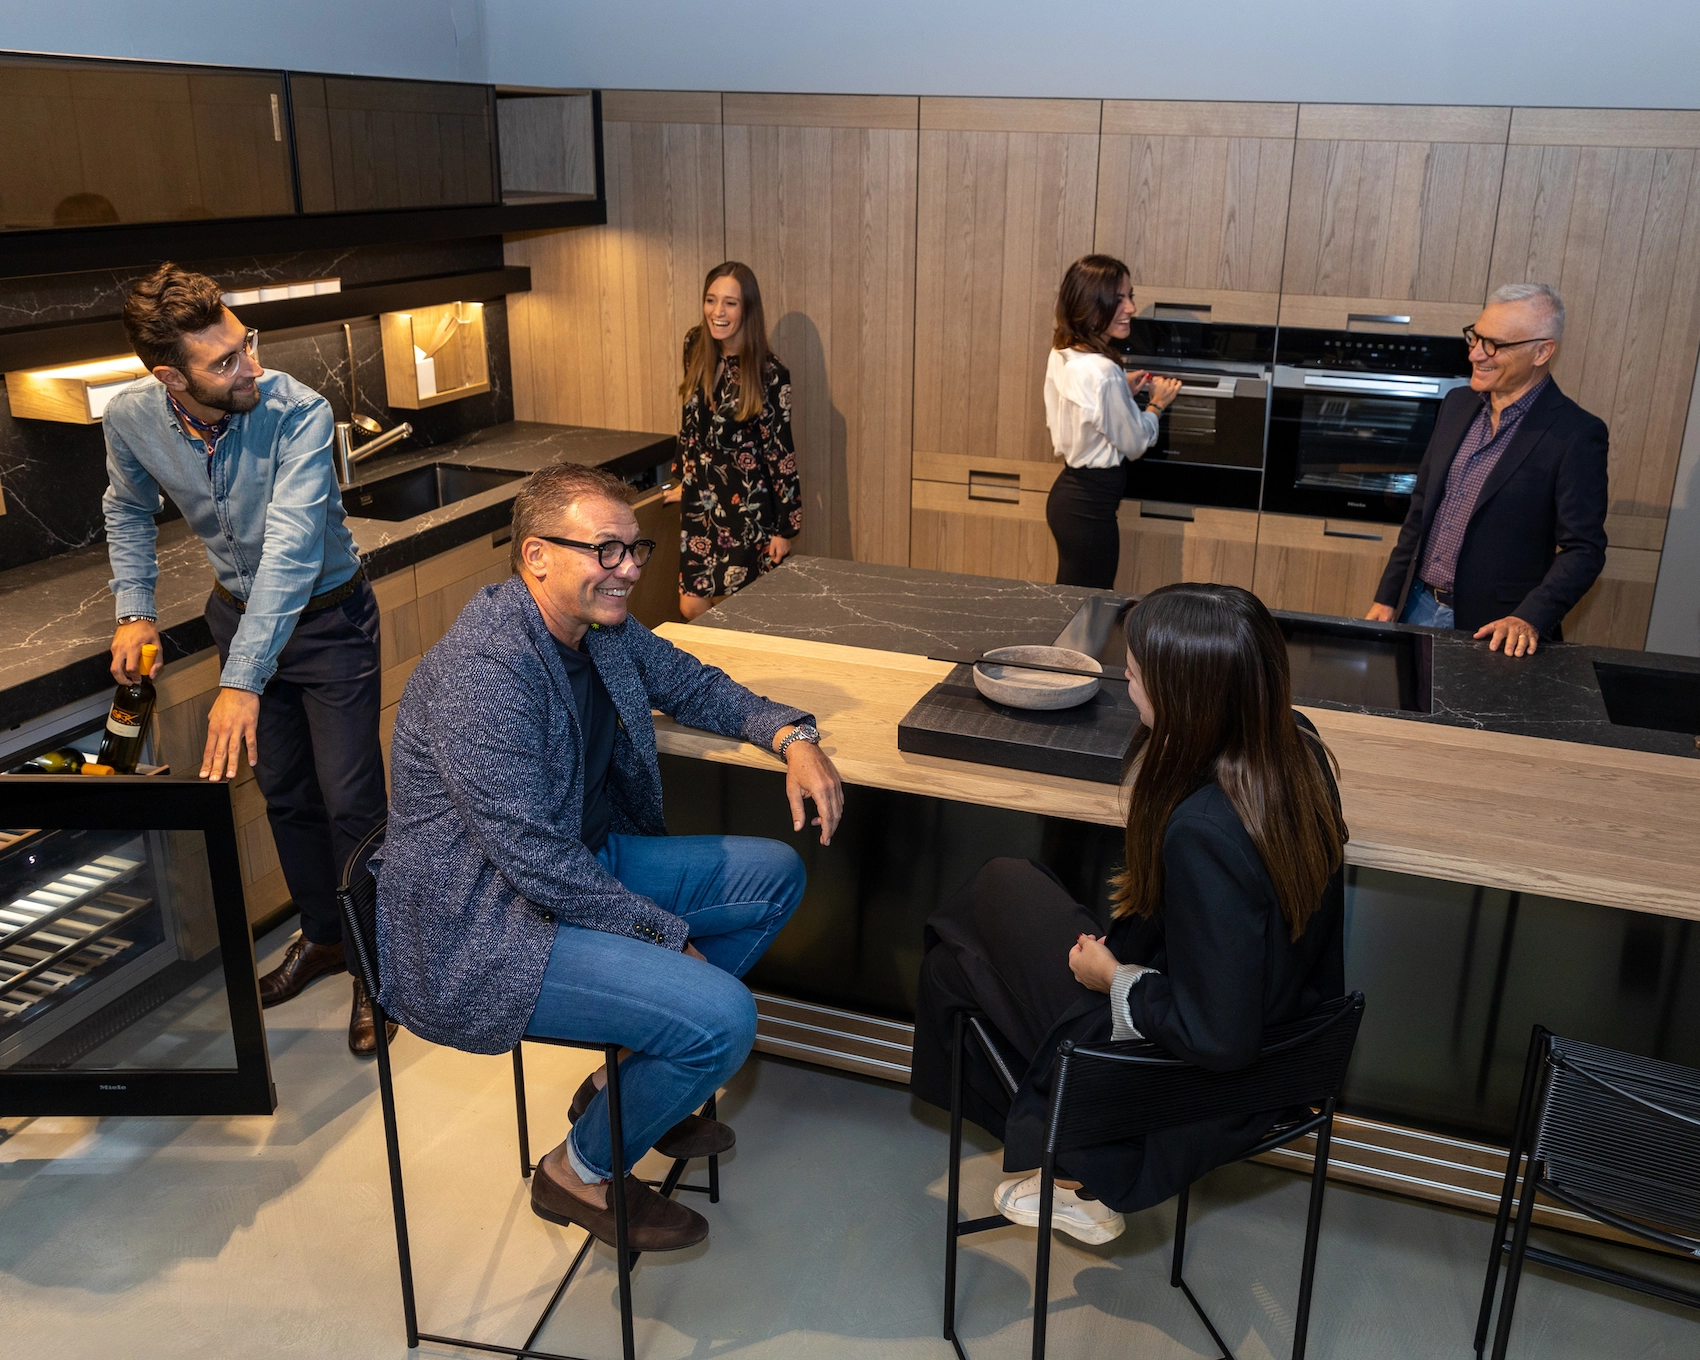 Photograph from above of an Arclinea wooden kitchen while 6 people laugh, living the environment.